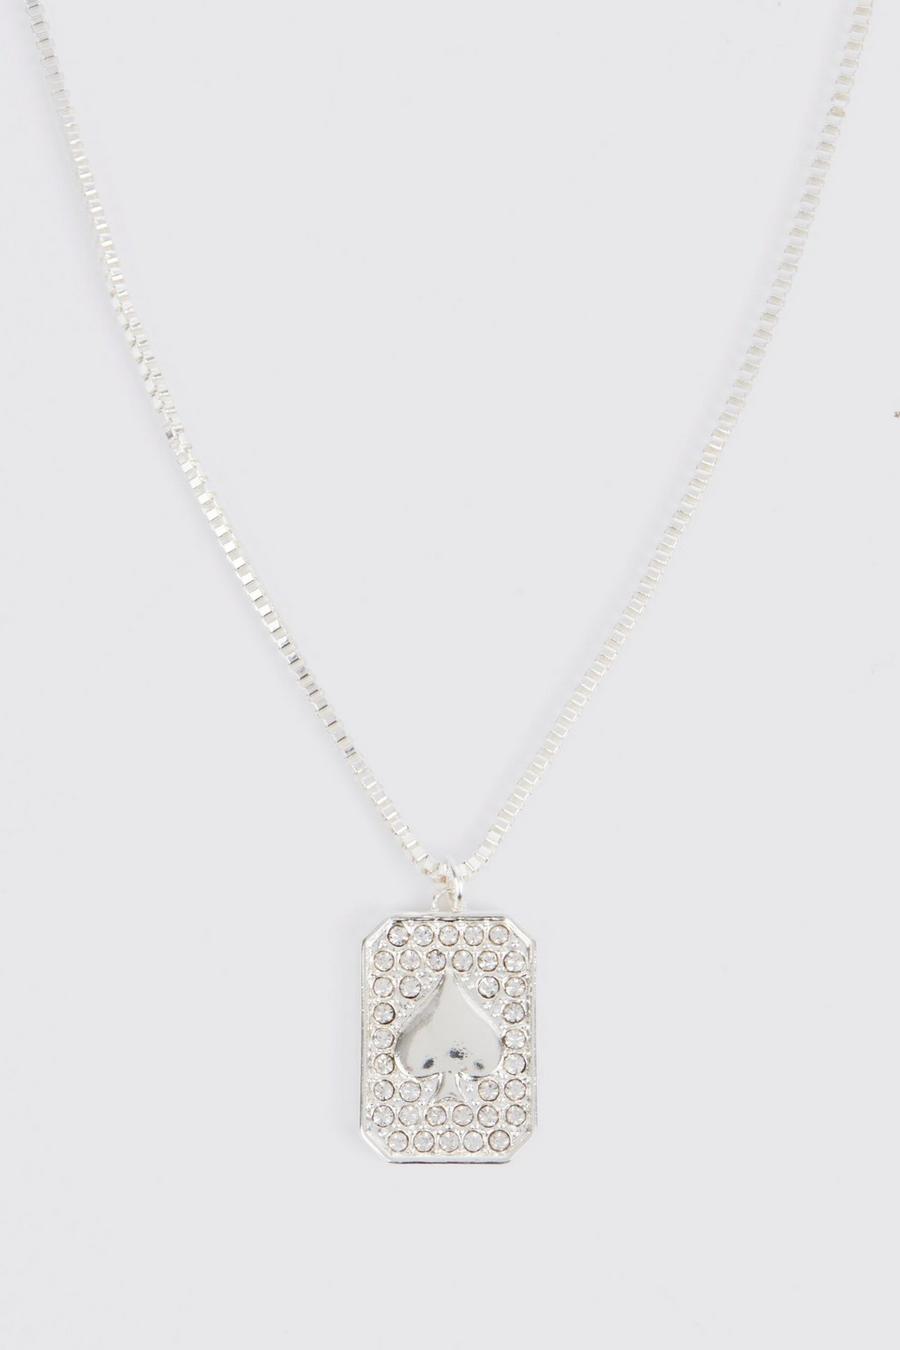 Silver Iced Ace Of Clubs Necklace 